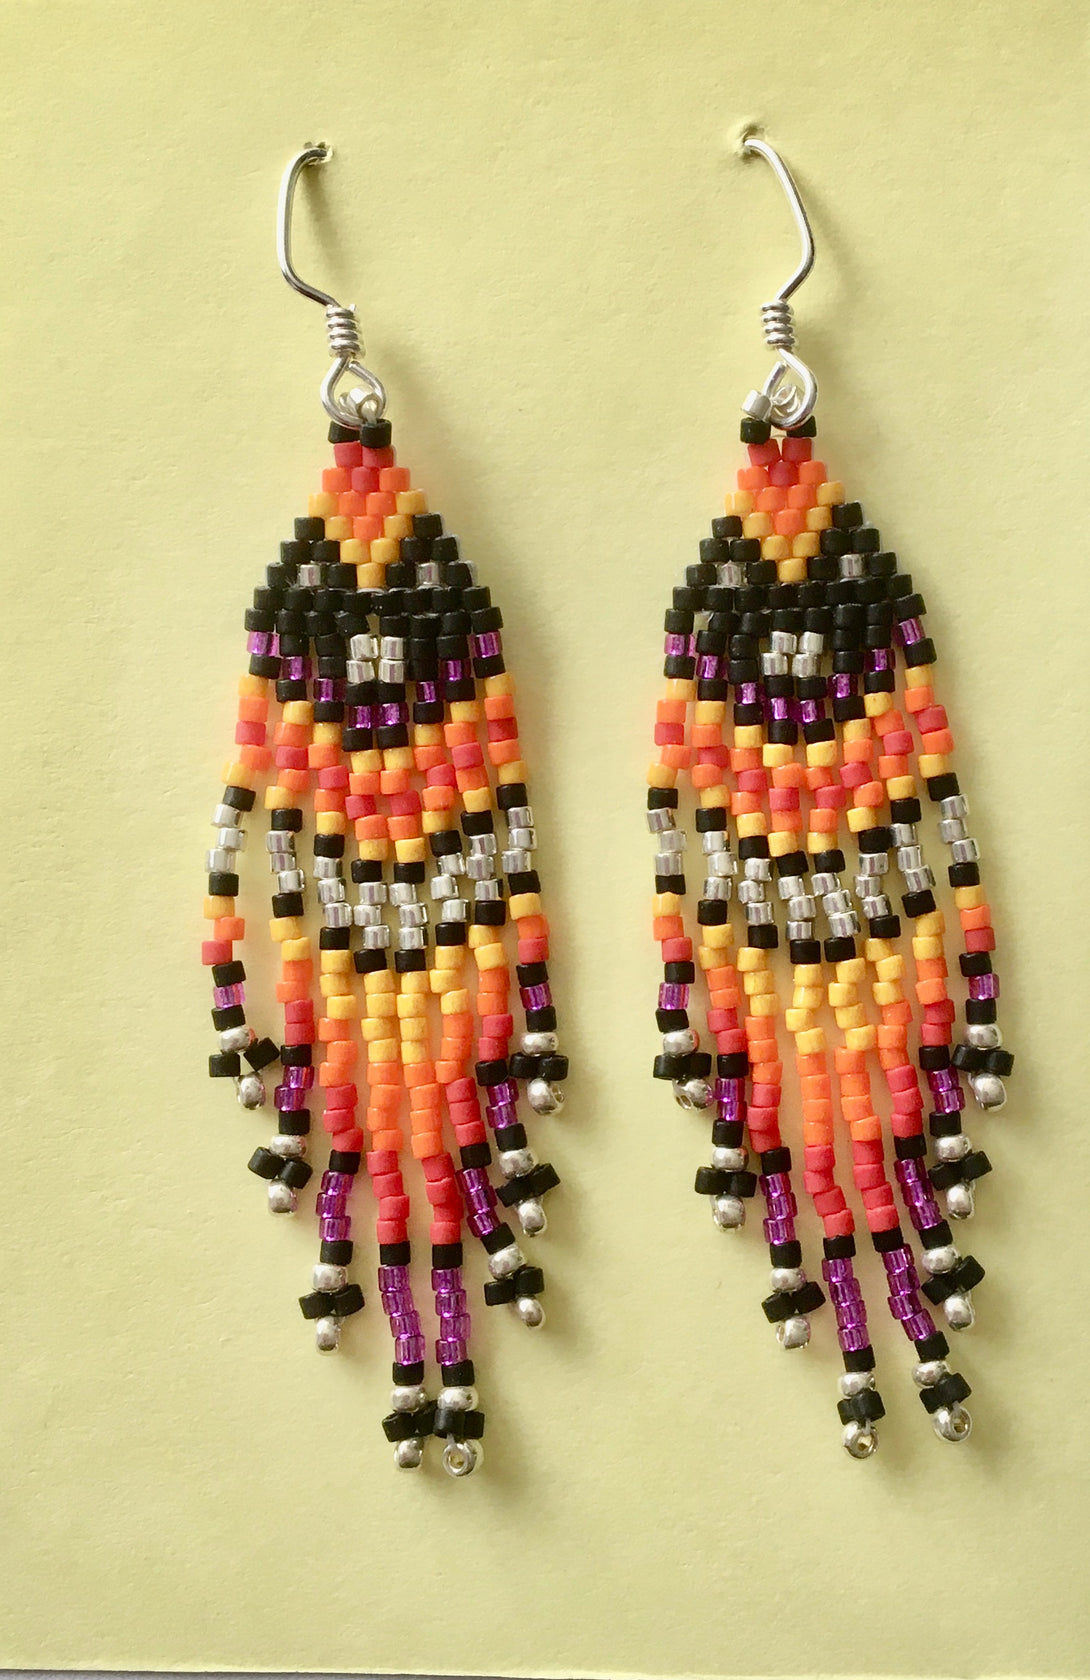 Bruce Thurston - Earrings - Beaded design, black, orange, red, purple, silver - Bruce Thurston - McMillan Arts Centre Gallery, Gift Shop and Box Office - Vancouver Island Art Gallery